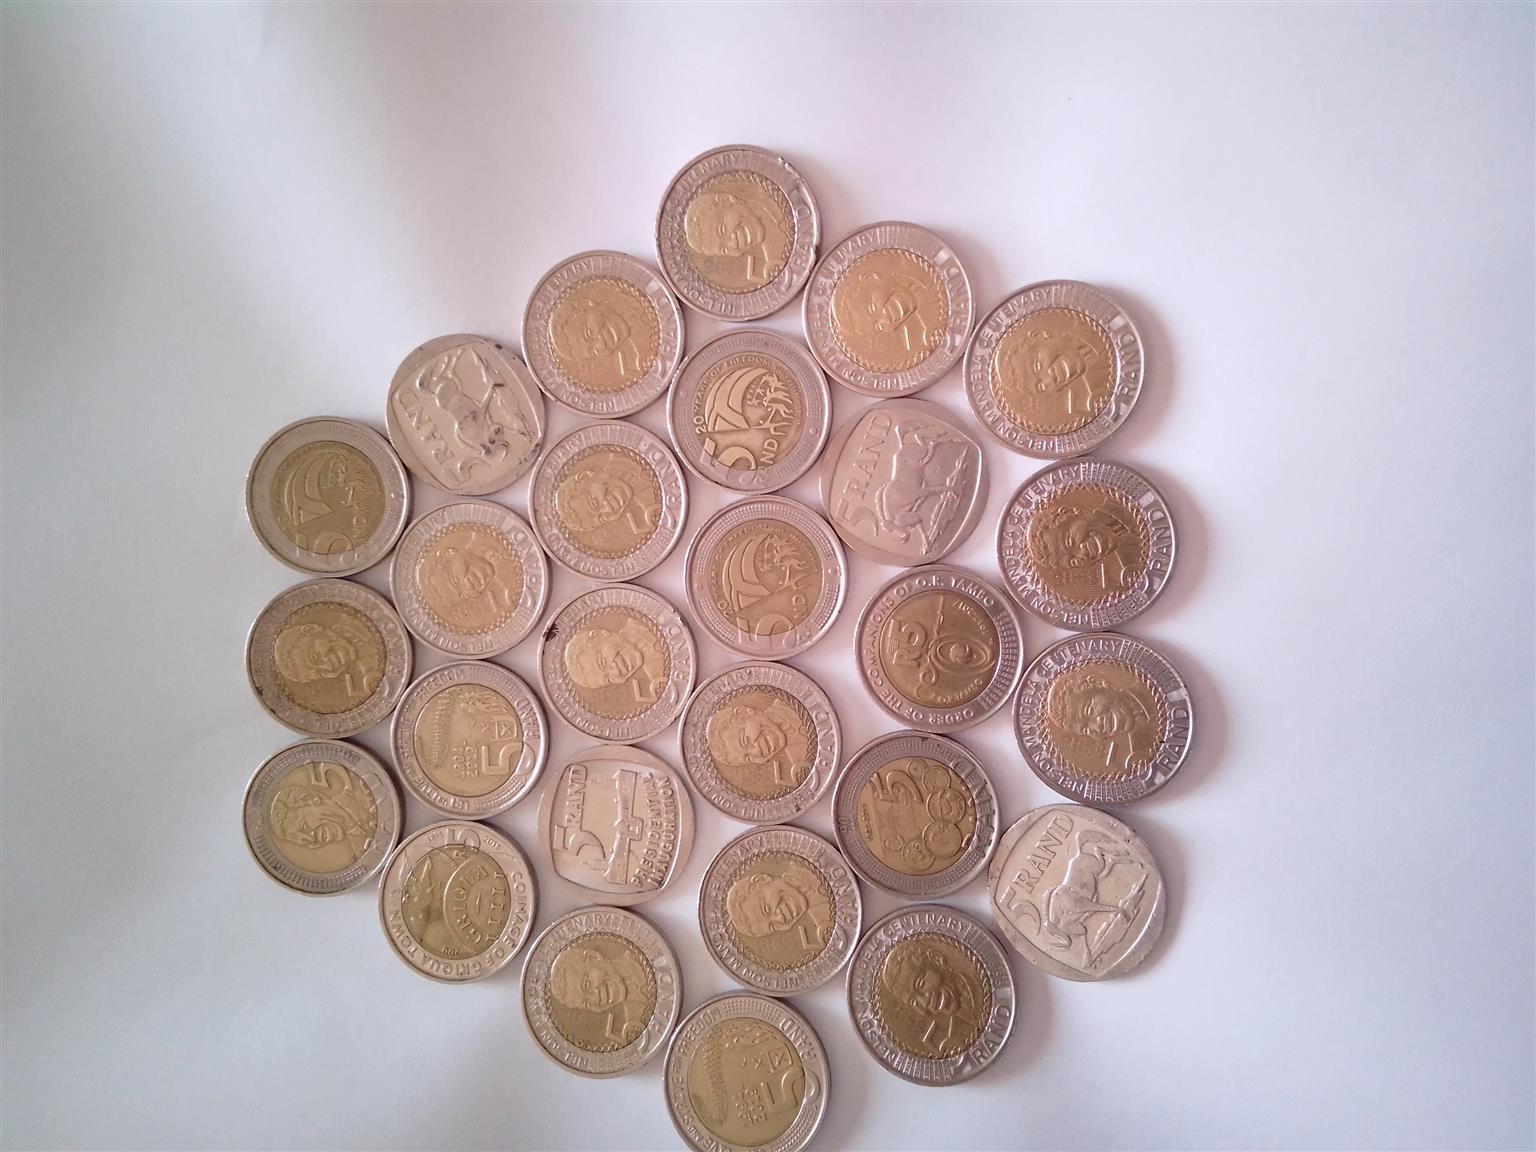 Mandela coins and other